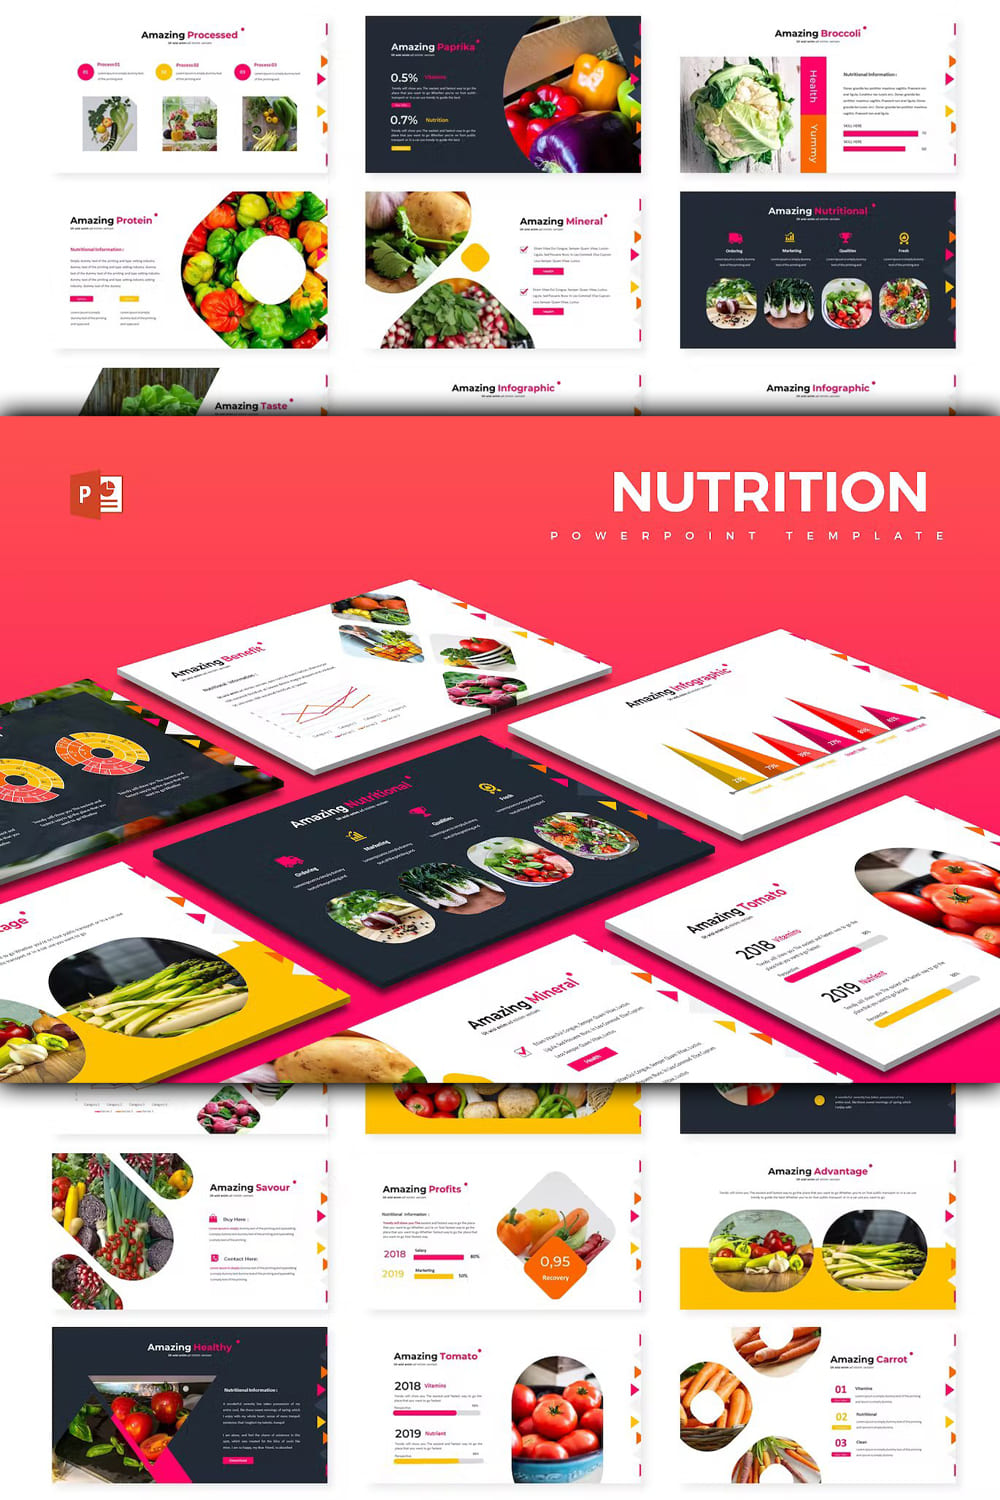 Nutrition powerpoint template - pinterest image preview.